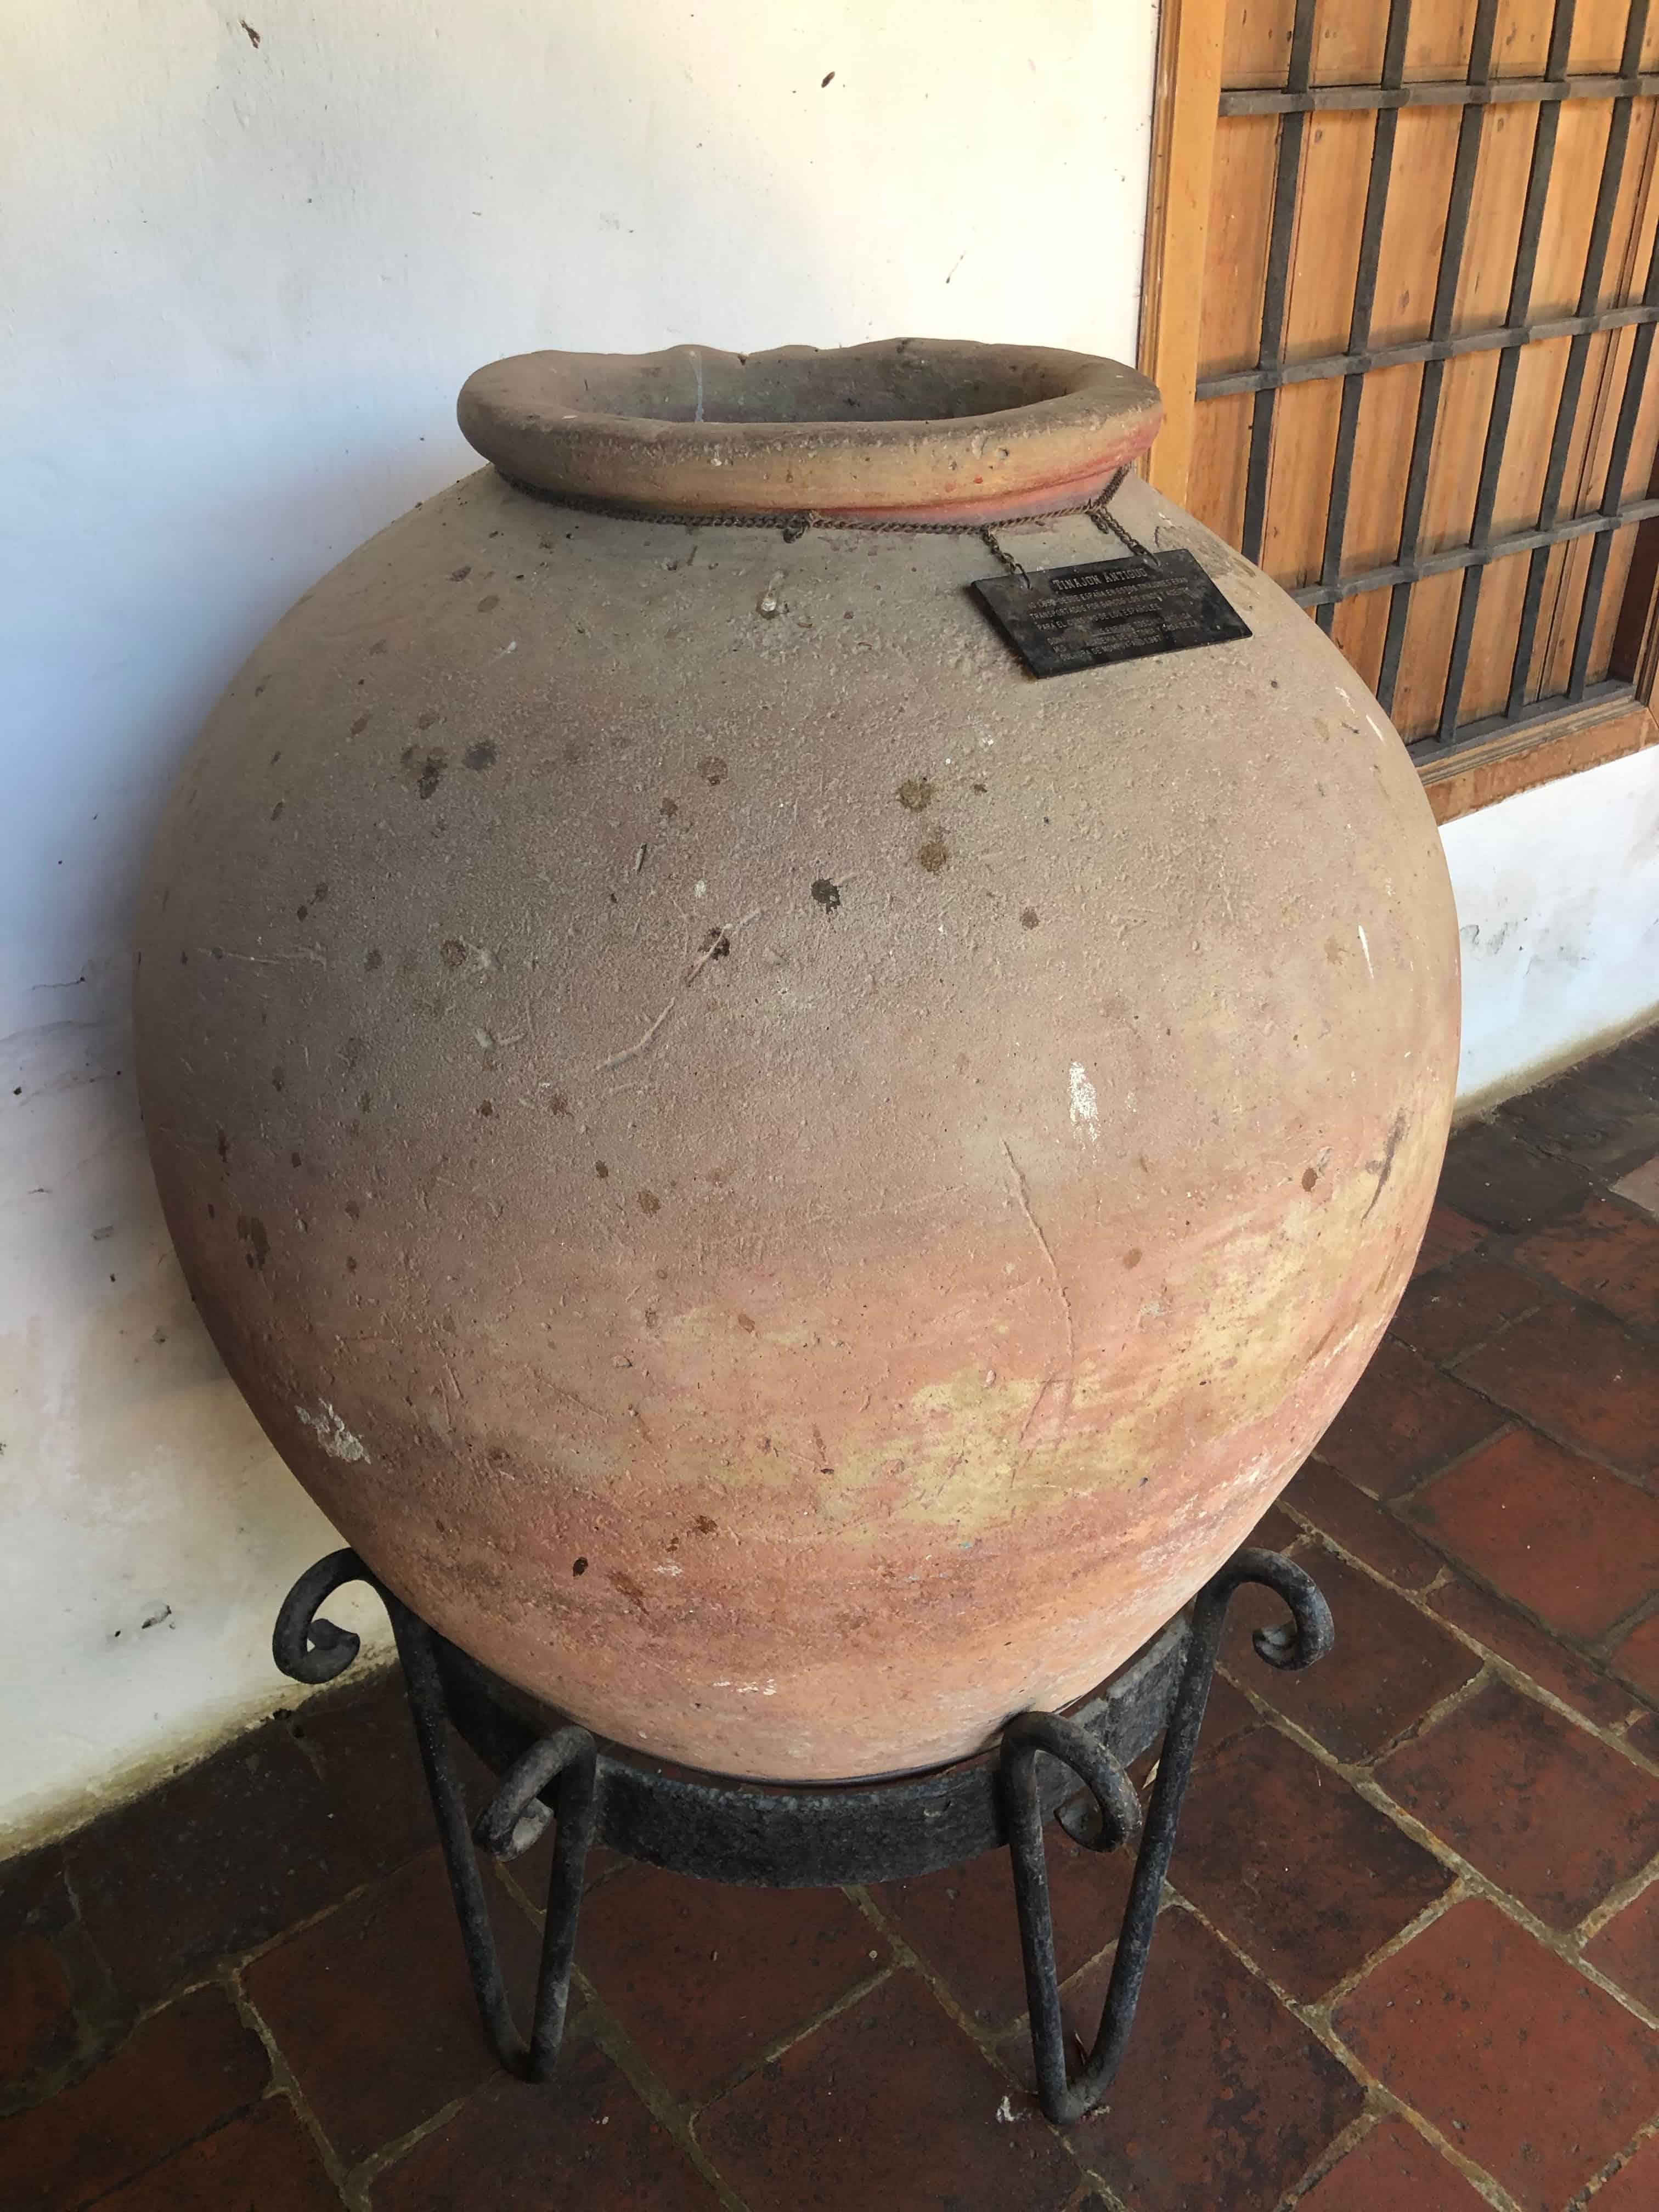 Large clay jug from Spain in the Cultural Center of Mompox, Bolívar, Colombia